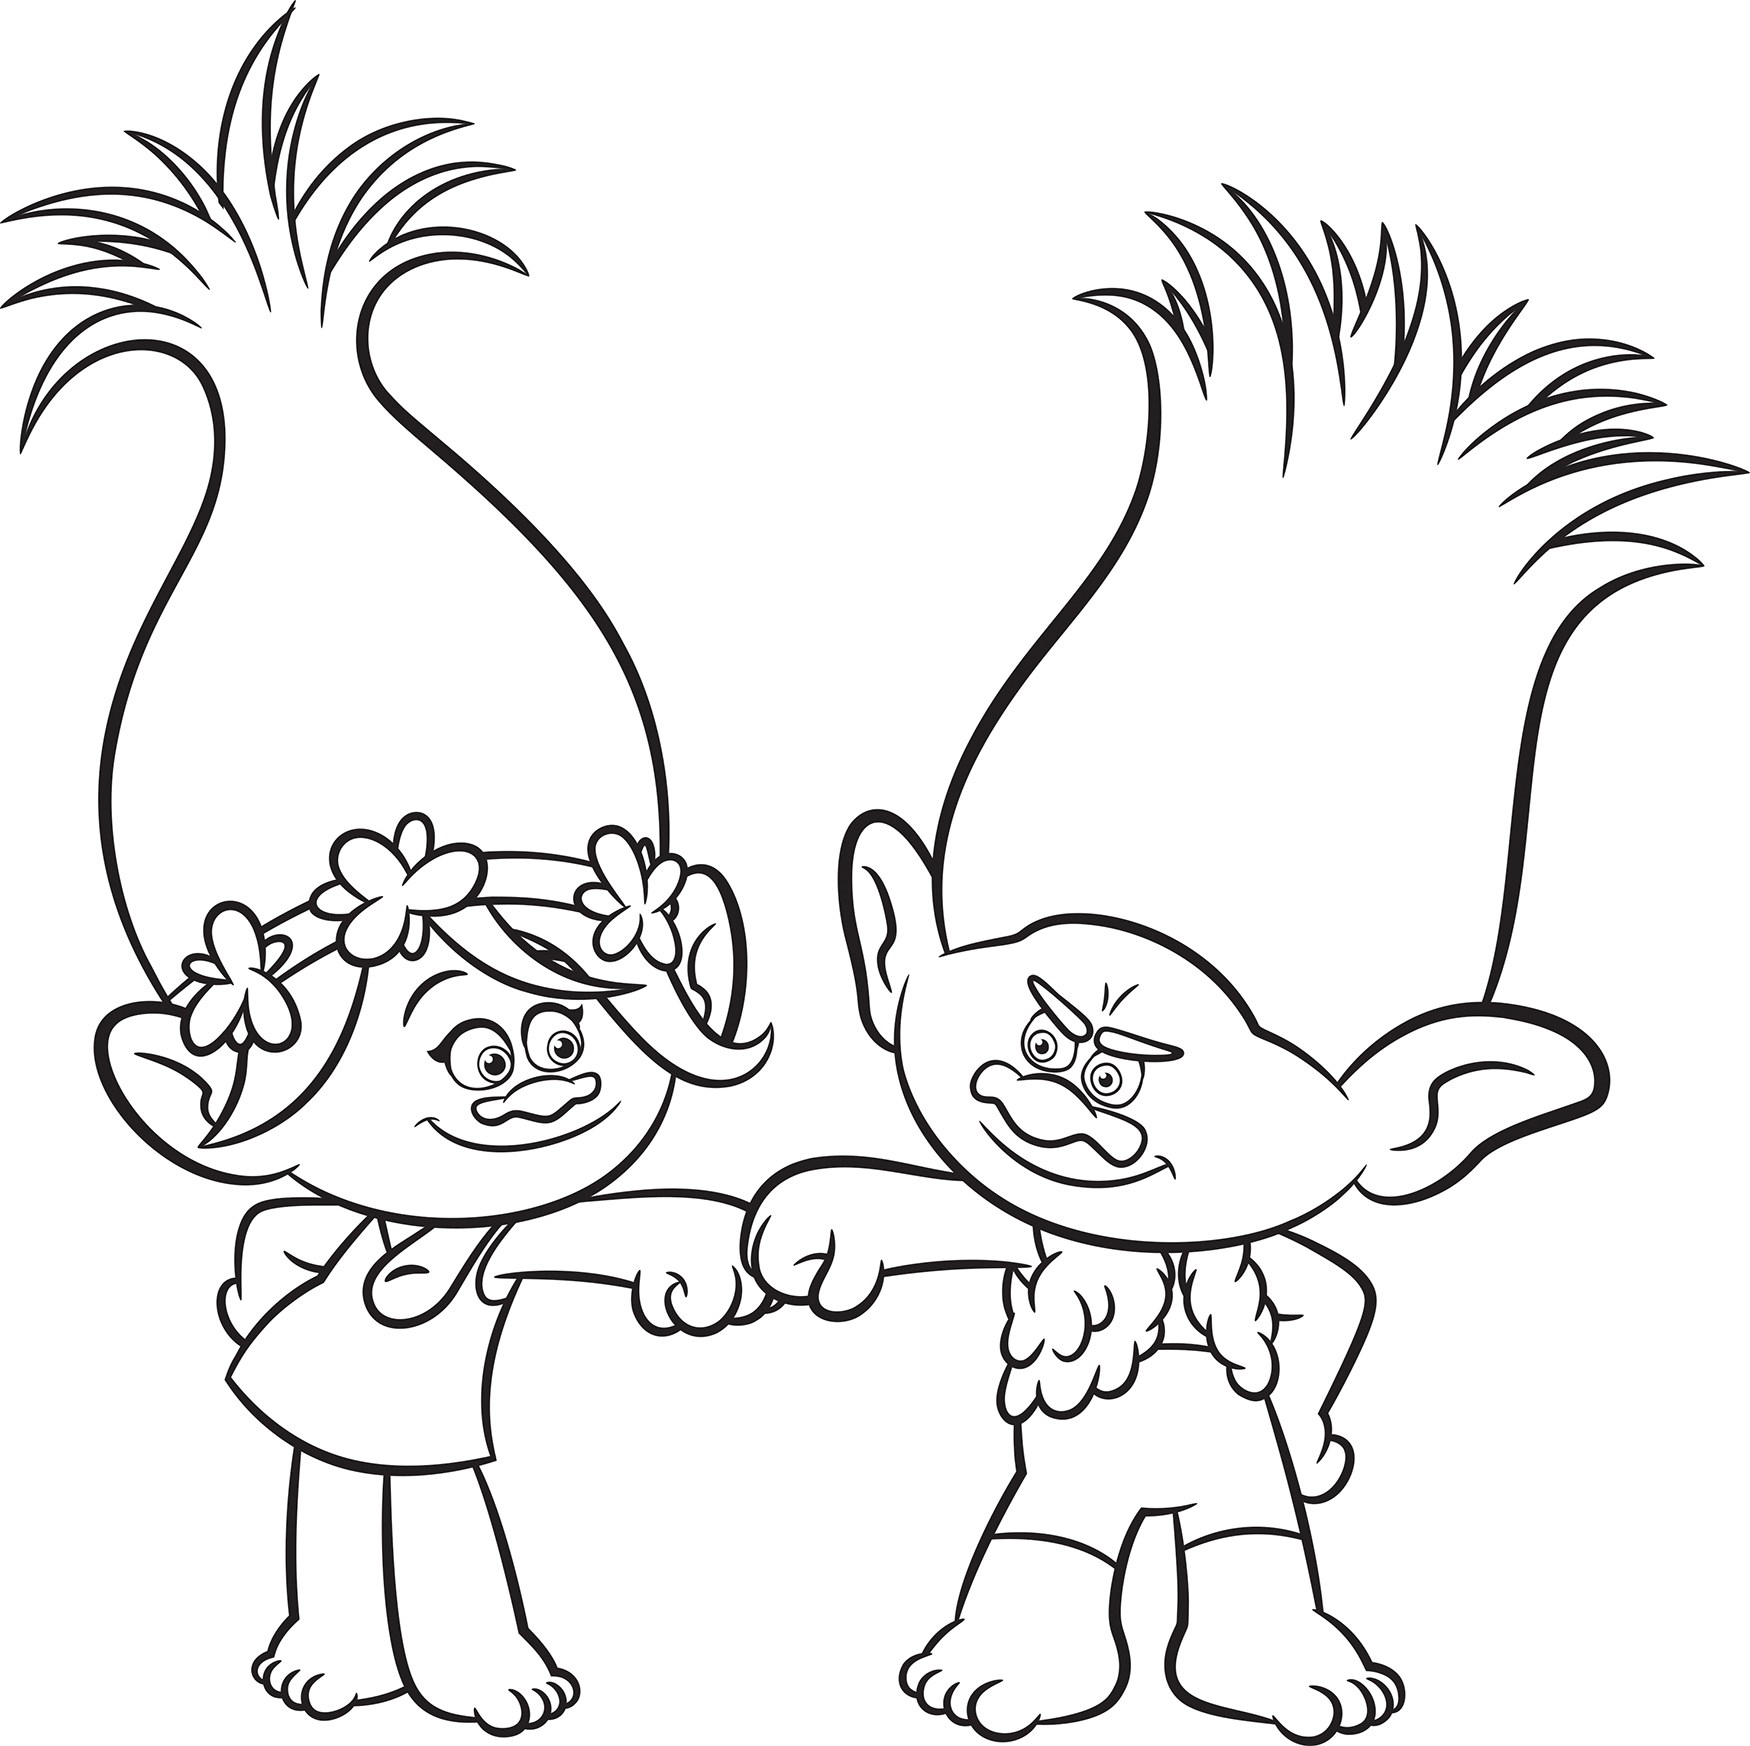 Trolls Movie Coloring Pages Best Coloring Pages For Kids